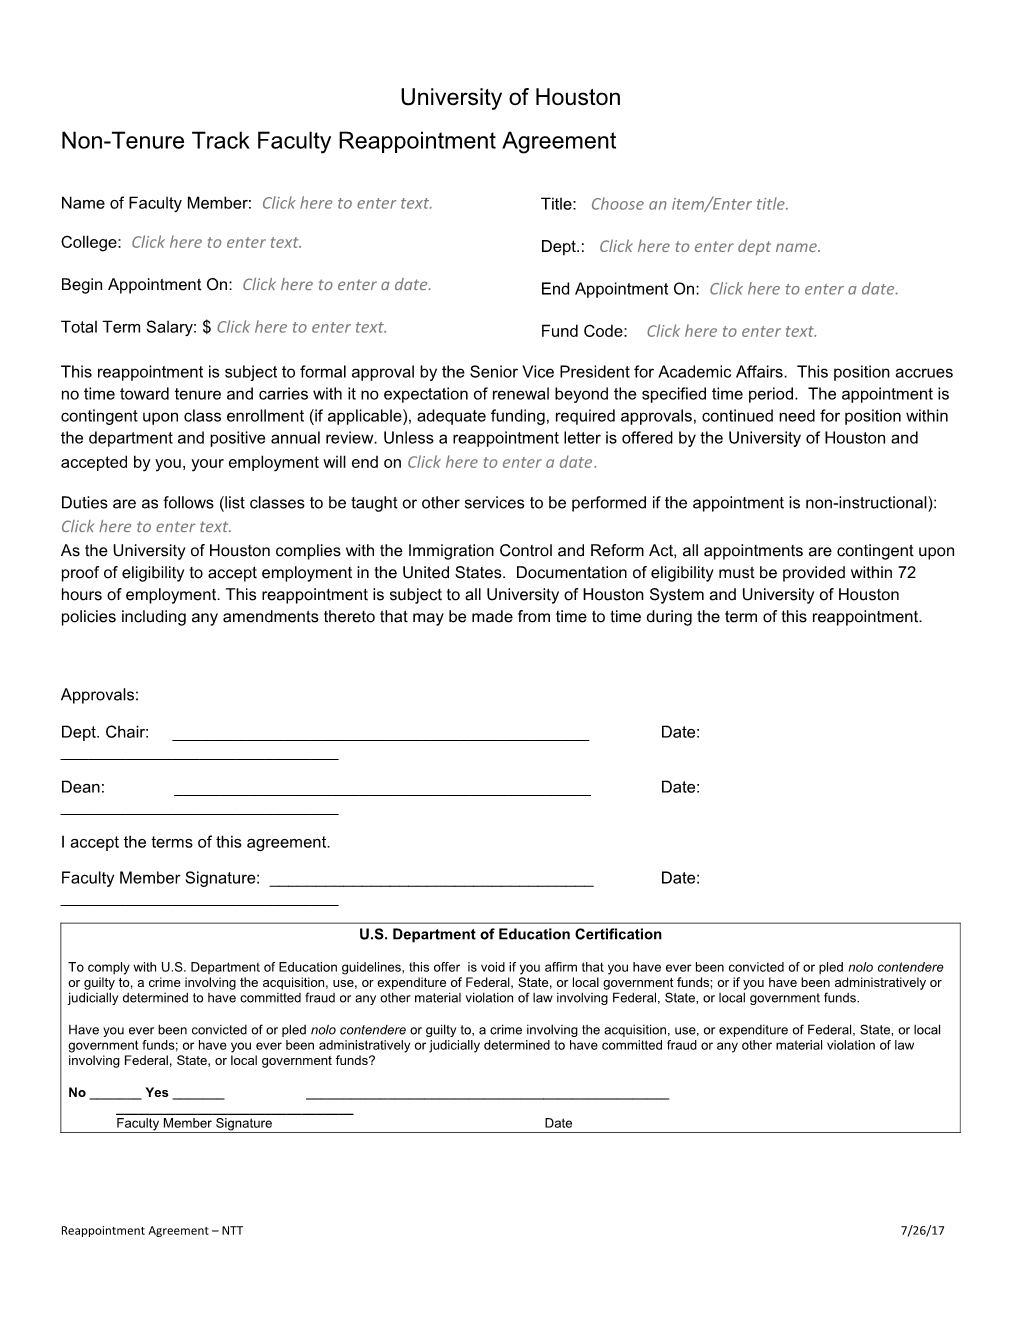 Non-Tenure Track Faculty Reappointment Agreement